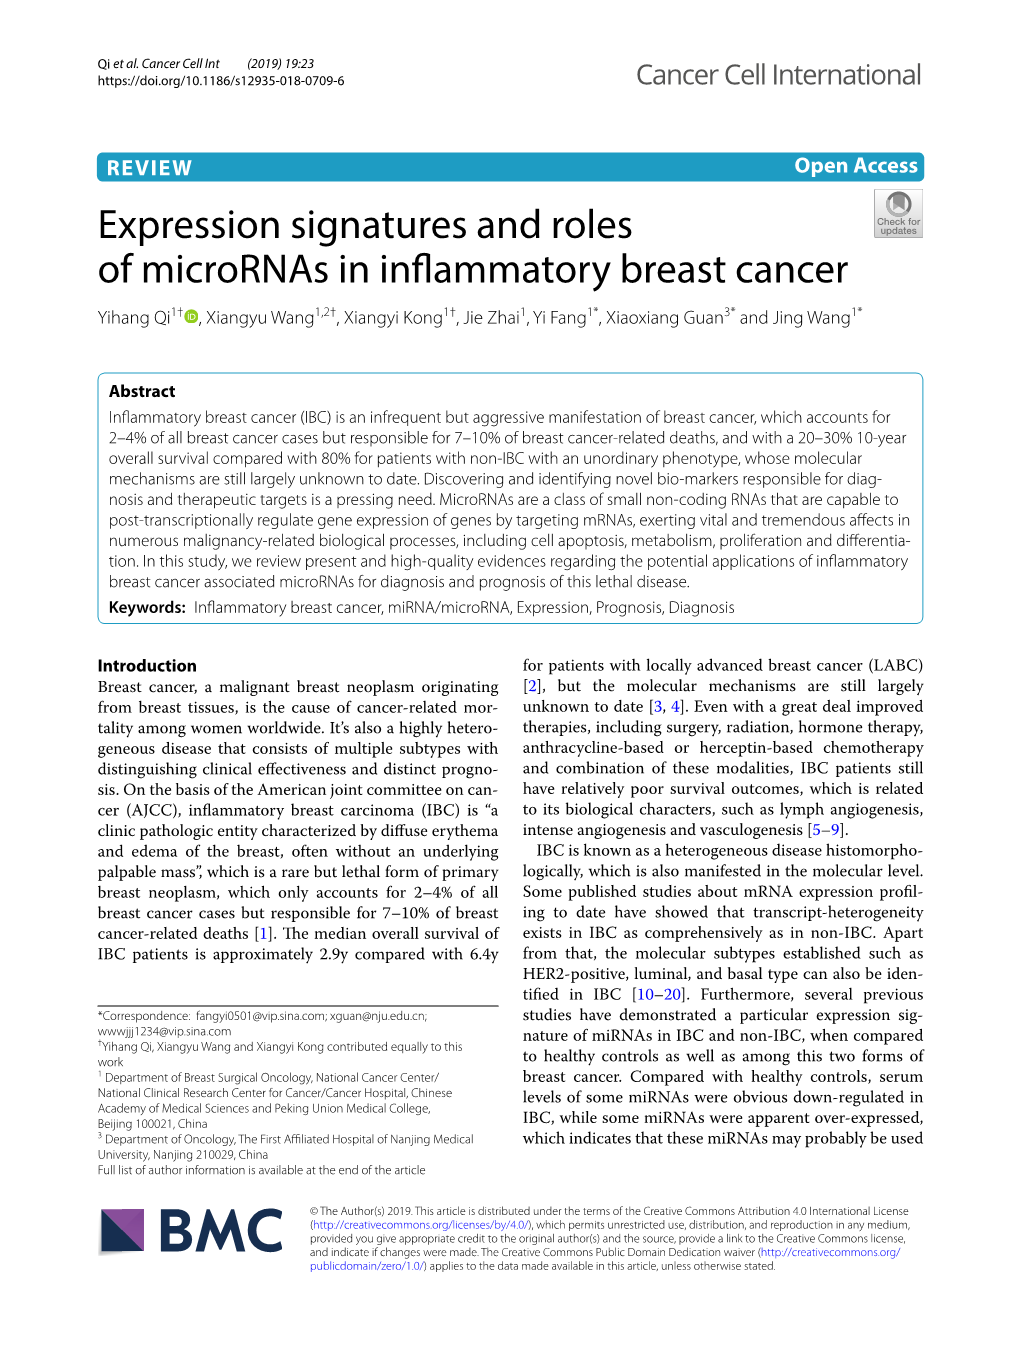 Expression Signatures and Roles of Micrornas in Inflammatory Breast